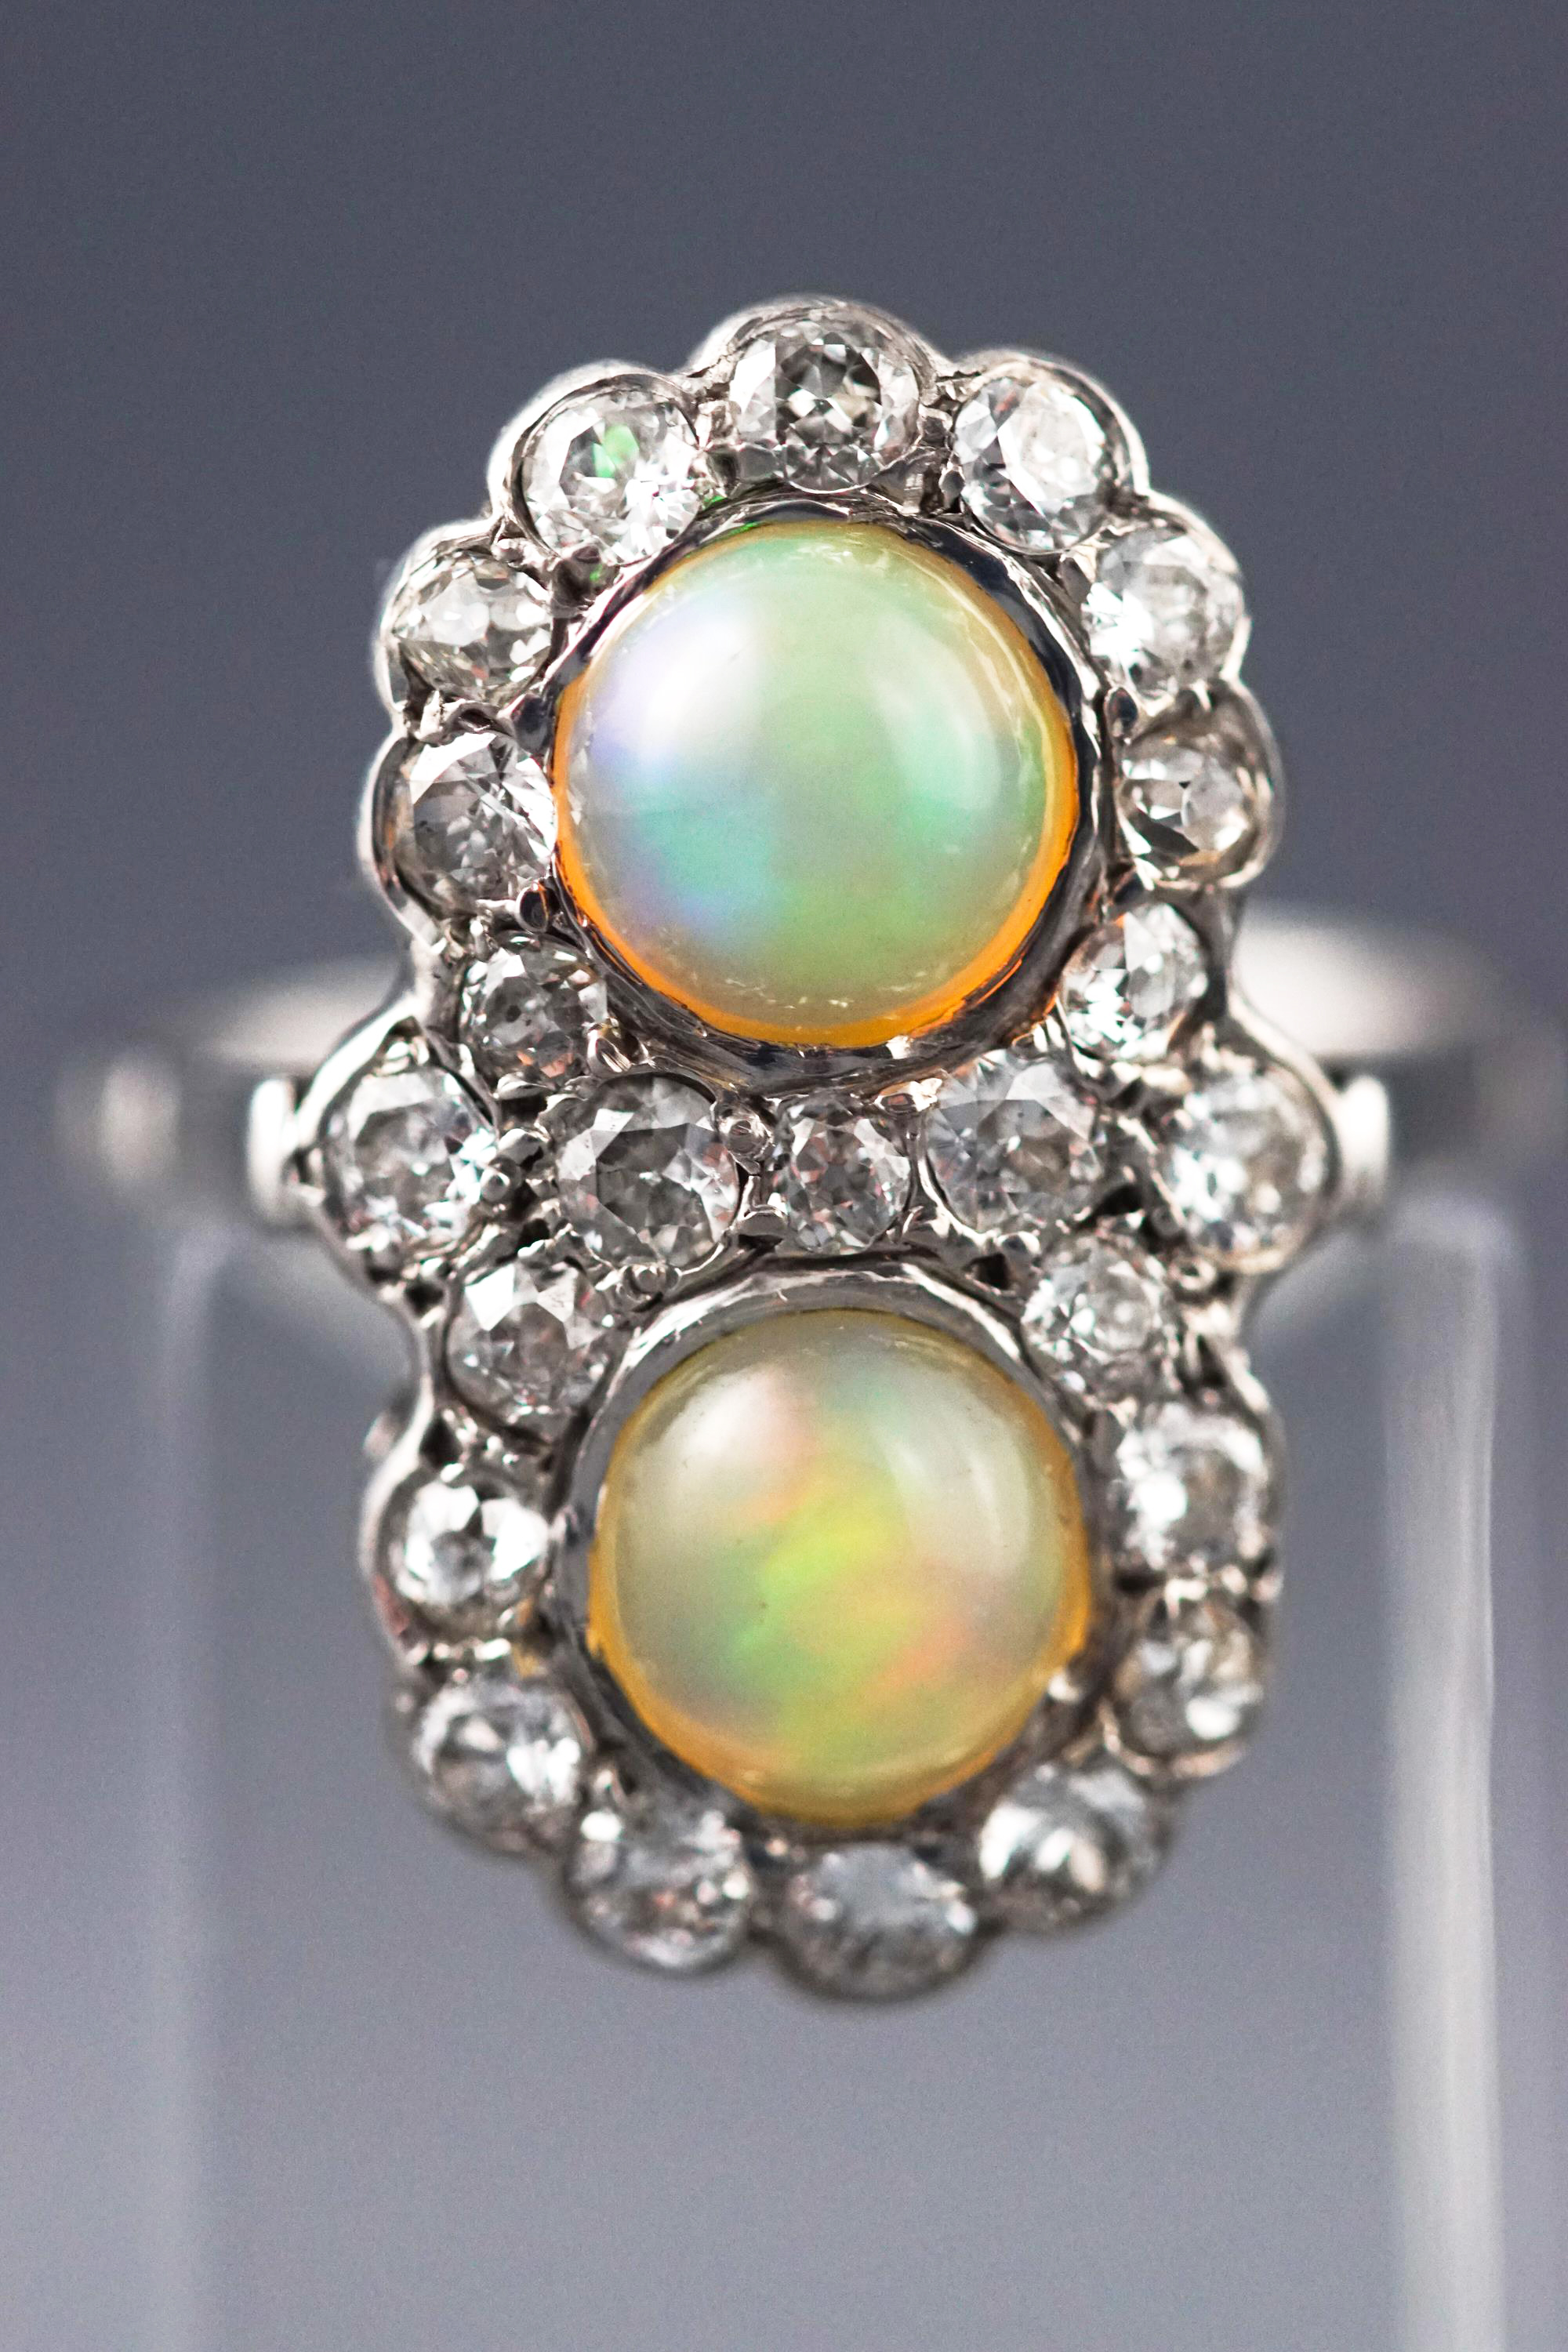 A white metal dress ring set with two circular cabochon opals together with twenty three diamonds.